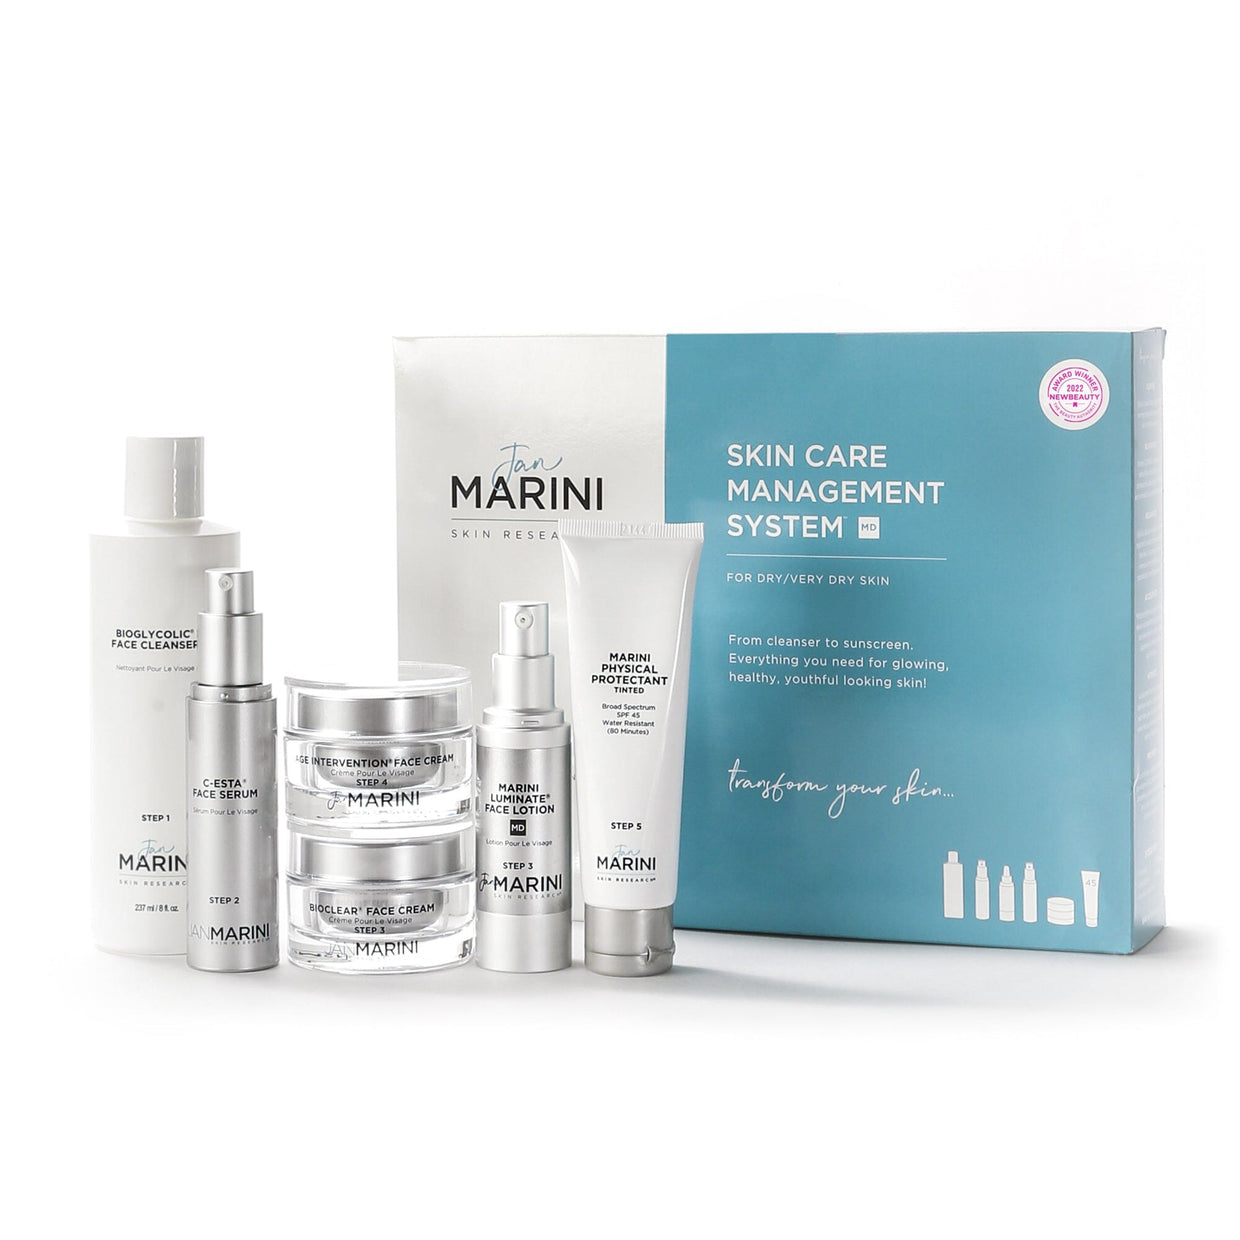 Jan Marini Skin Care Management System MD - Dry/Very Dry Skin with Marini Physical Protectant Tinted SPF 45 Anti-Aging Skin Care Kits Jan Marini Shop at Exclusive Beauty Club